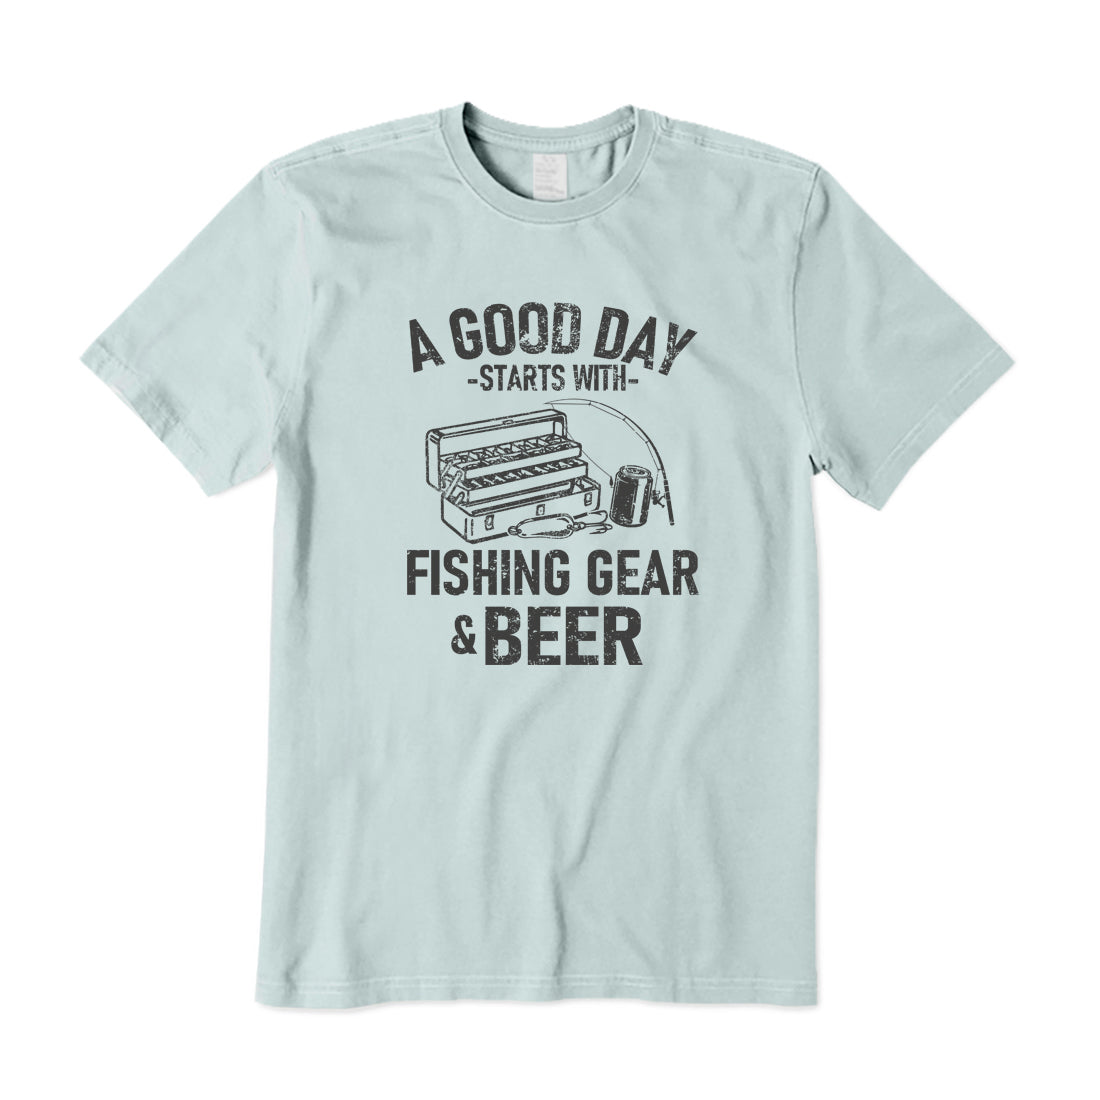 A Good Day Starts With Fishing Gear & Beer T-Shirt